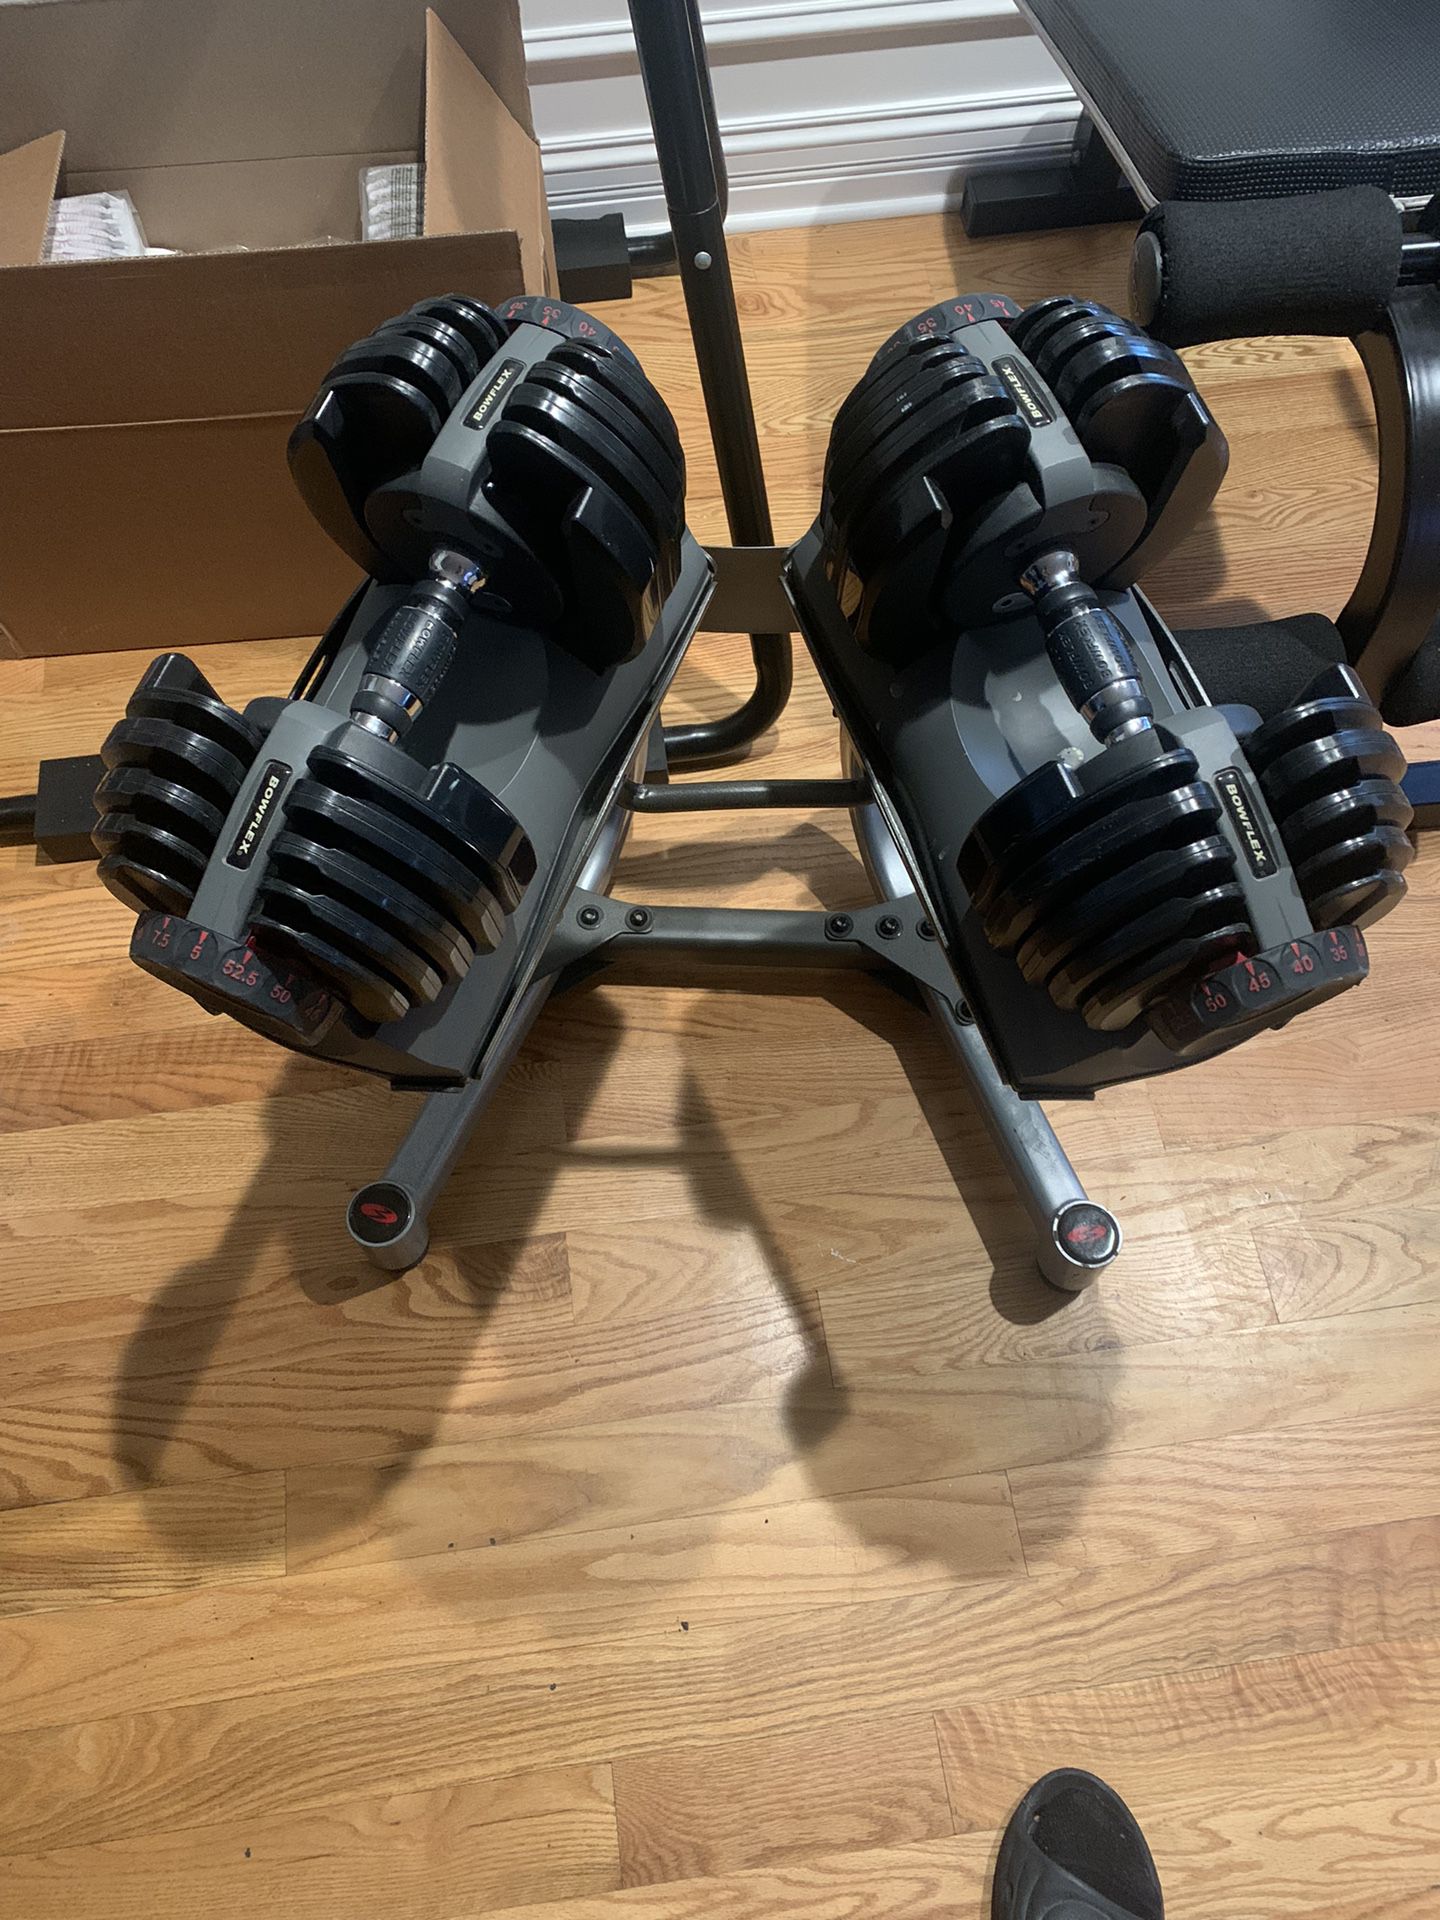 2 Bowflex 552 Adjustable 55lbs Dumbbells And Stand